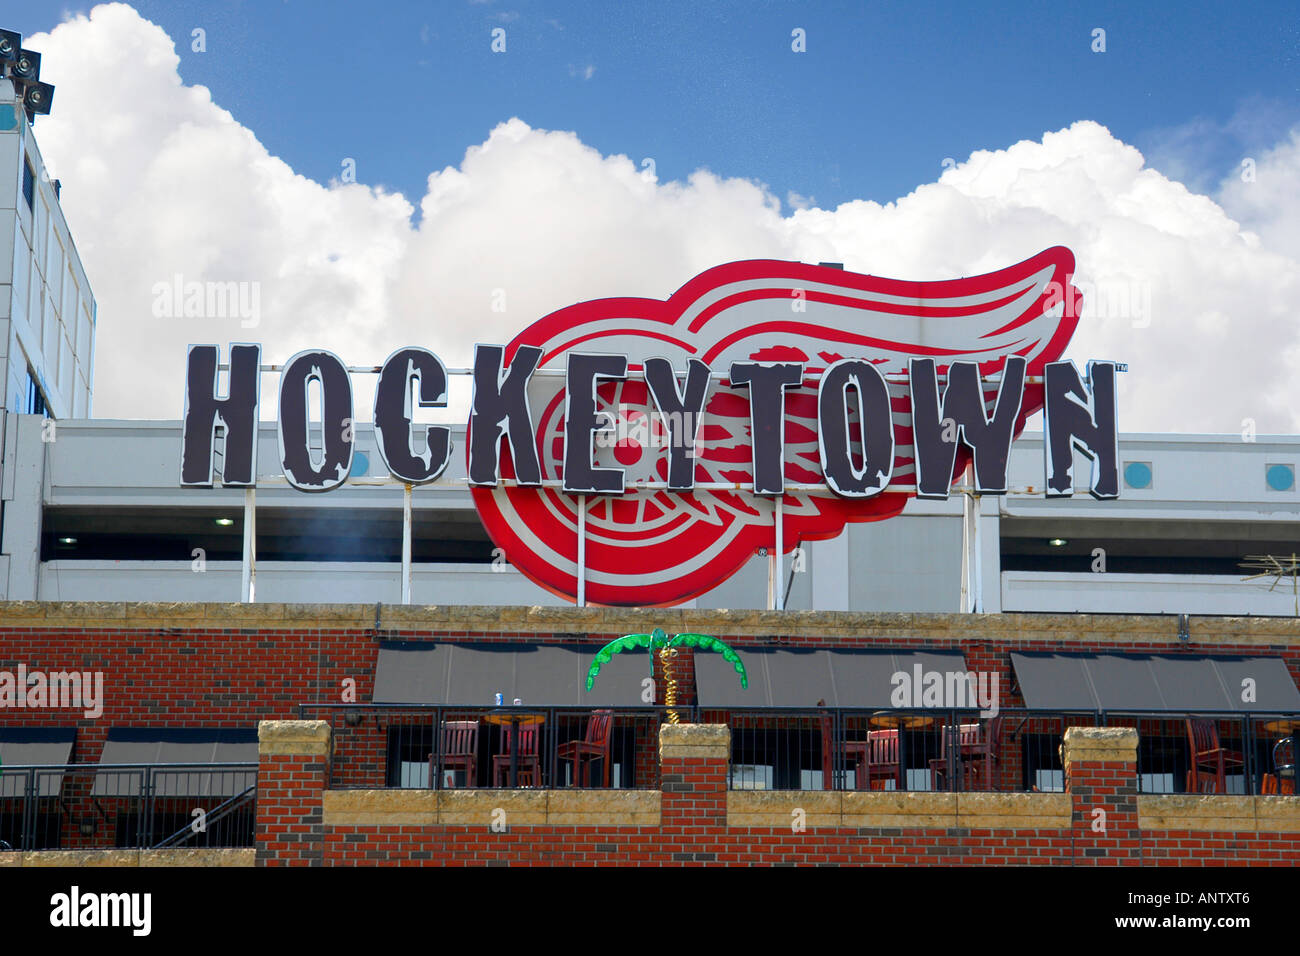 Hockeytown cafe in downtown Detroit Michigan MI Stock Photo